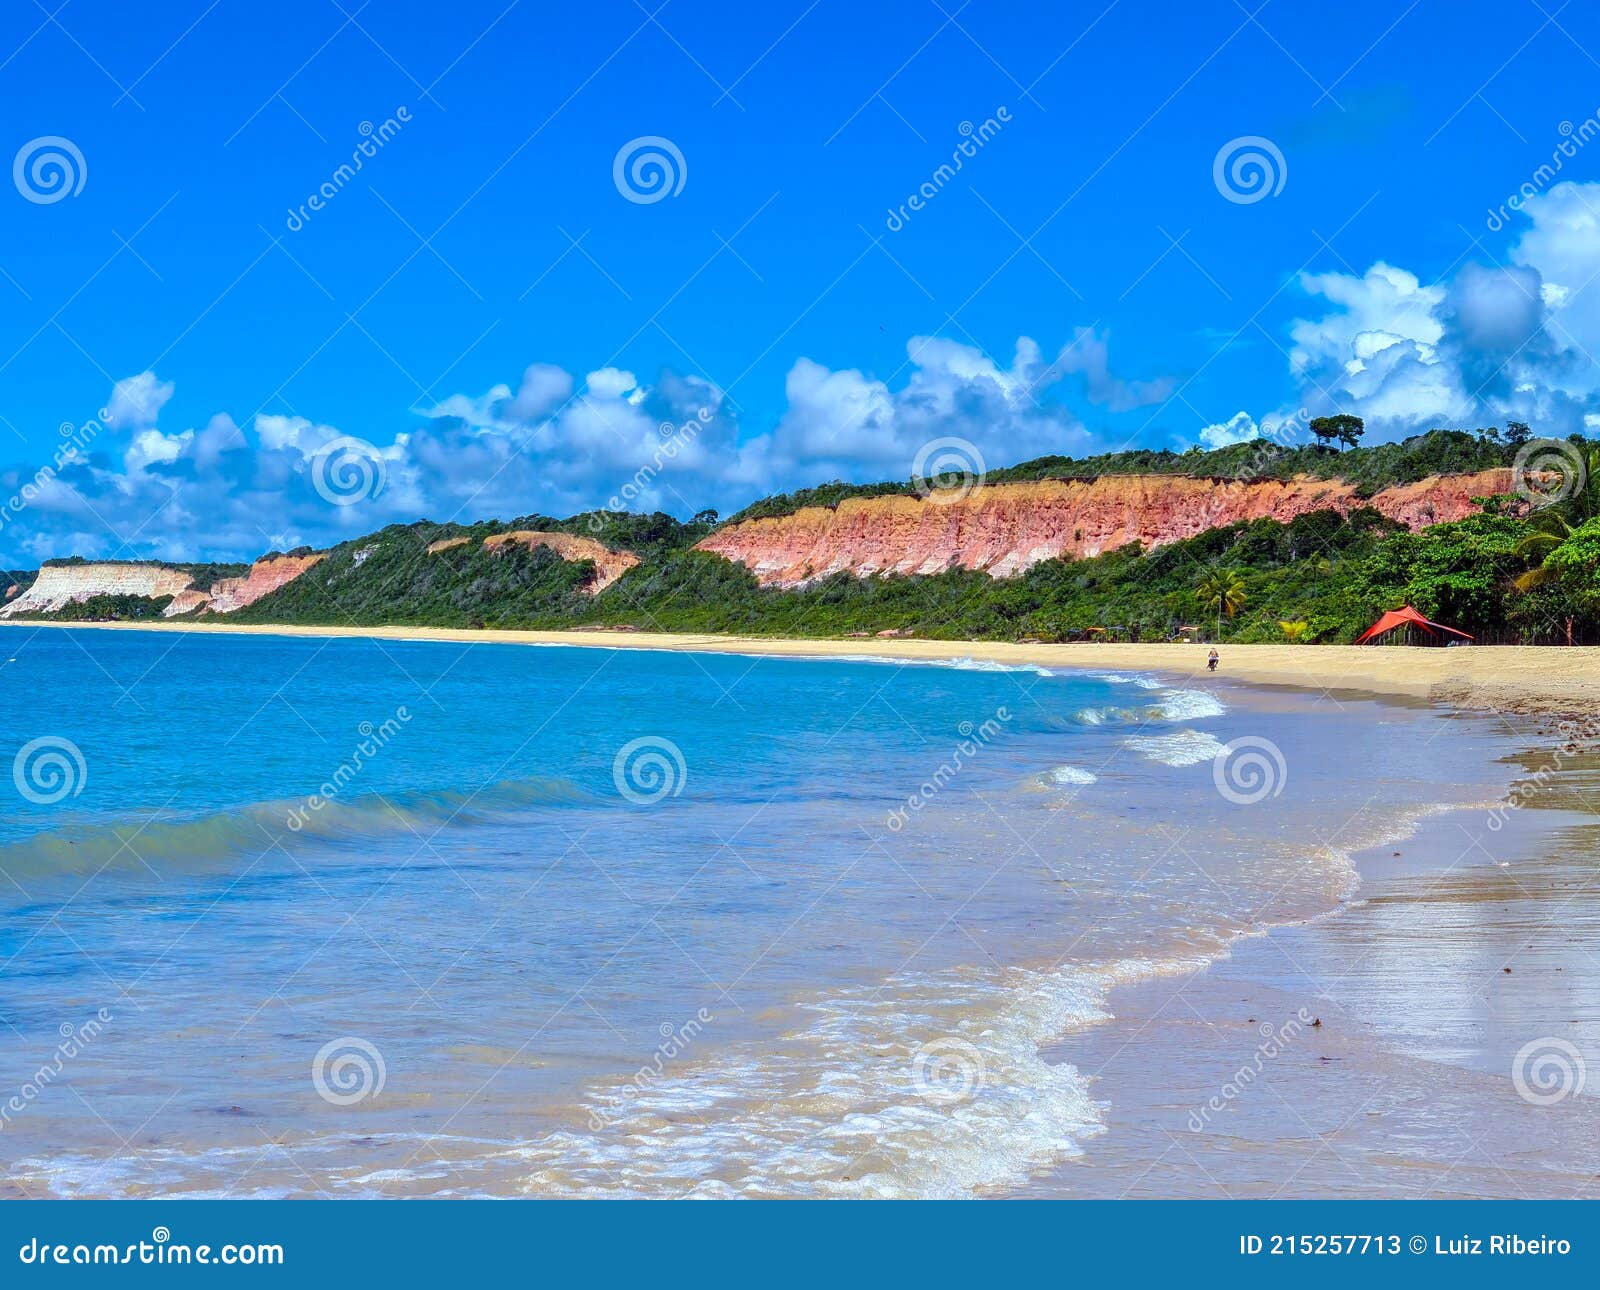 arraial d`ajuda is a district of the brazilian municipality of porto seguro, on the coast of the state of bahia